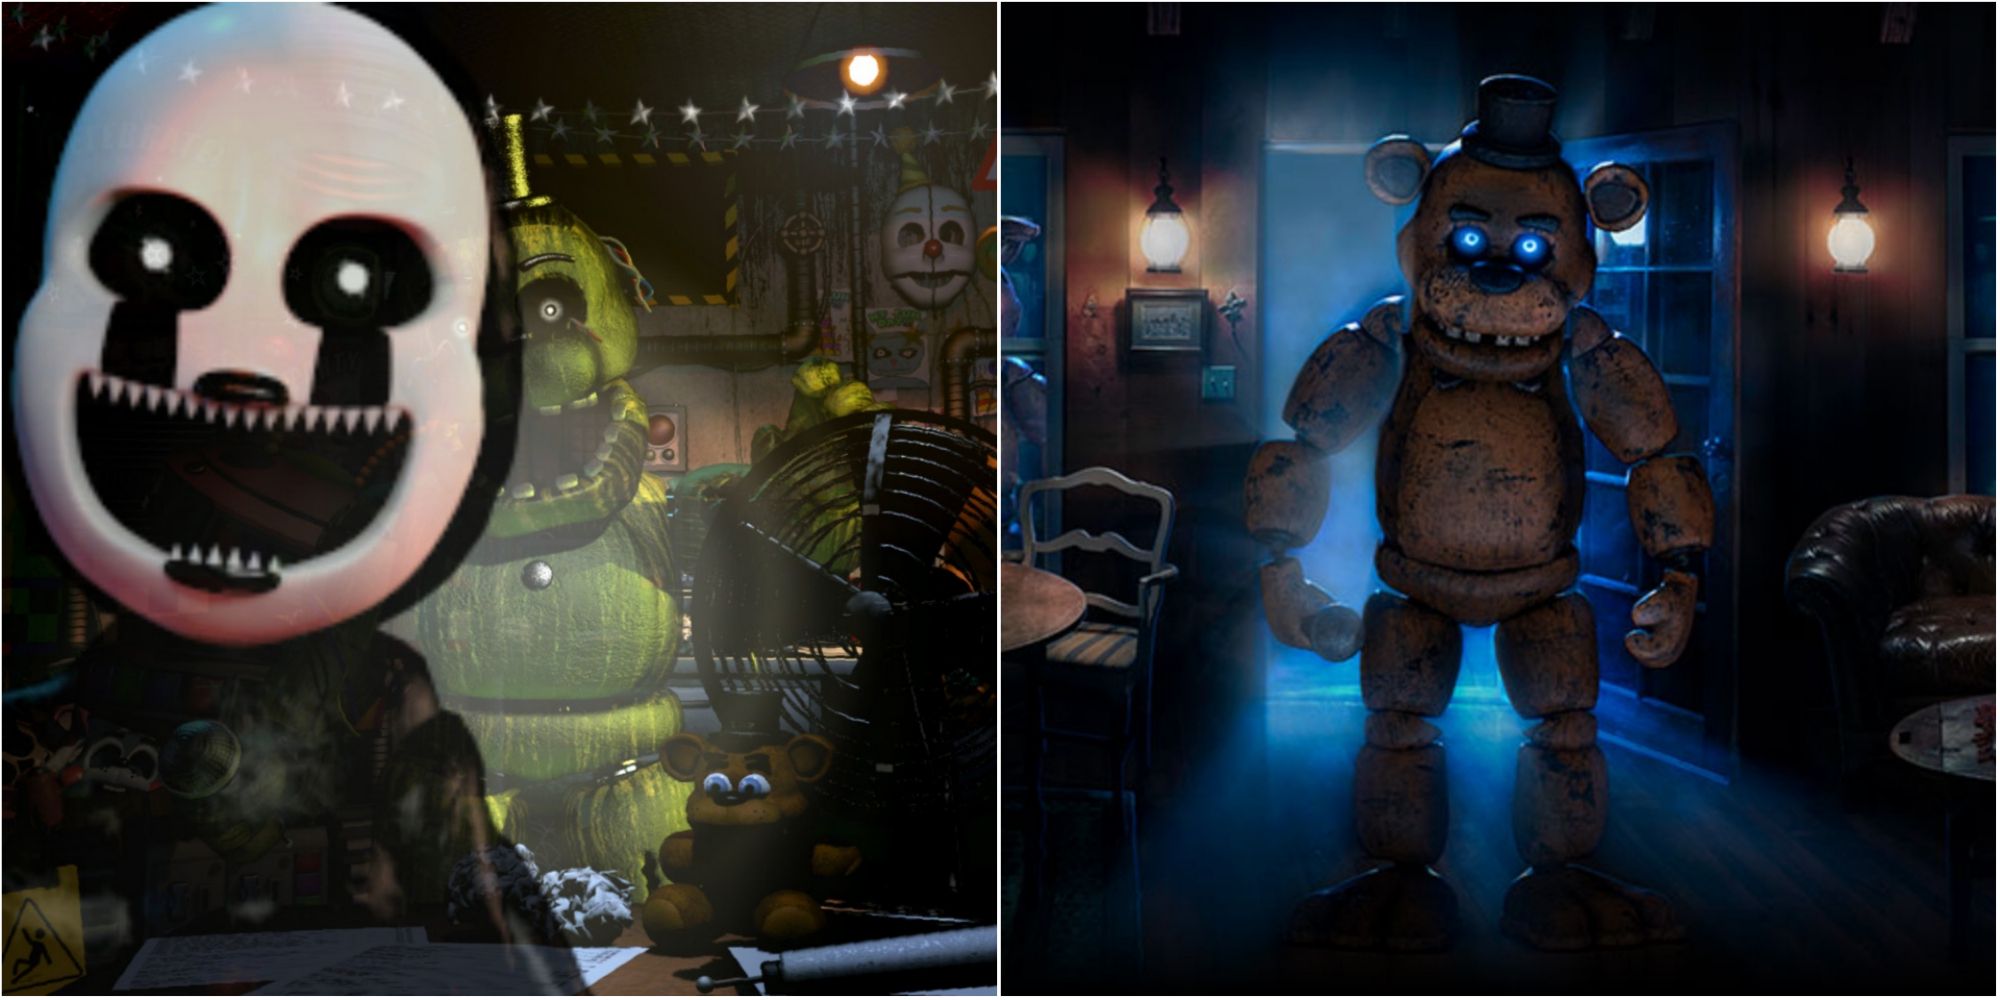 Surprise Five Nights at Freddy's spinoff hits Steam — and it's free -  Polygon